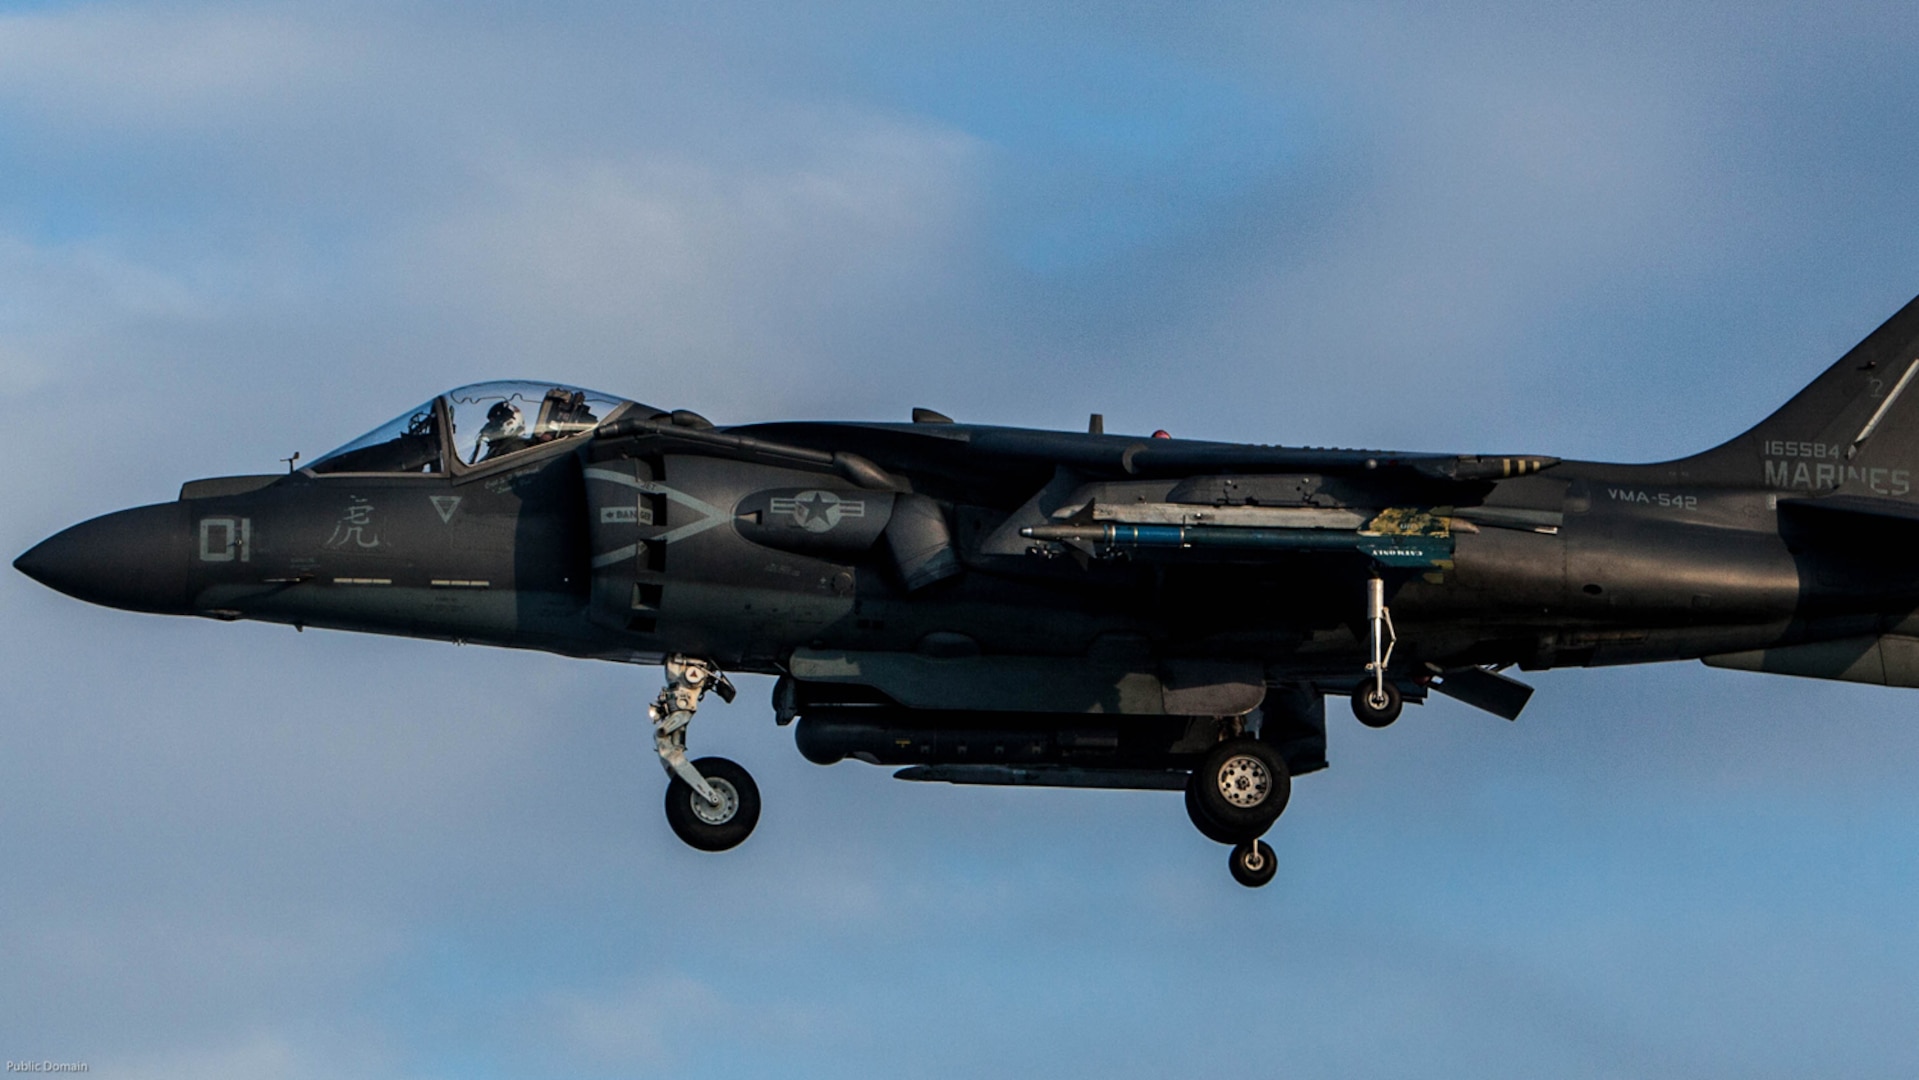 A U.S. Marine Corps AV-8B Harrier with Marine Attack Squadron (VMA) 542 prepares to land on the runway during the Aviation Relocation Training Program at Chitose Air Base, Japan, Dec. 14, 2016. VMA-542 is conducting training at Chitose Air Base in an effort to increase operational readiness between the U.S. Marine Corps and the Japan Air Self Defense Force, improve interoperability and reduce noise concerns of aviation training on local communities by disseminating training locations throughout Japan. 